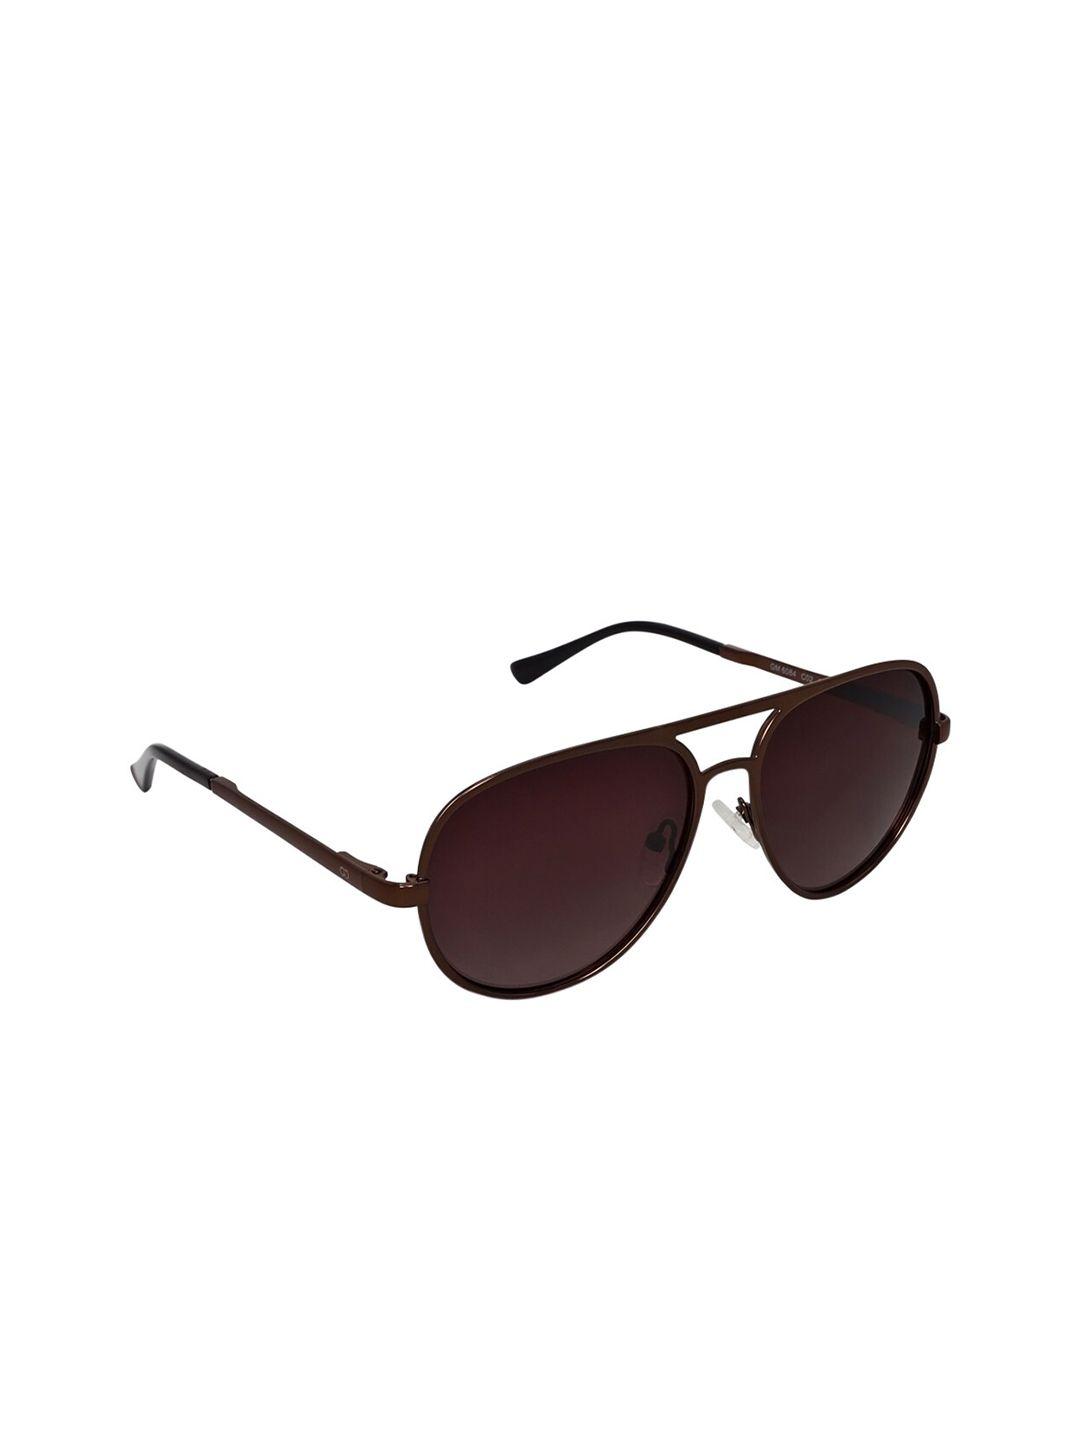 gio-collection-men-brown-lens-&-brown-aviator-sunglasses-with-uv-protected-lens-gm6084c02